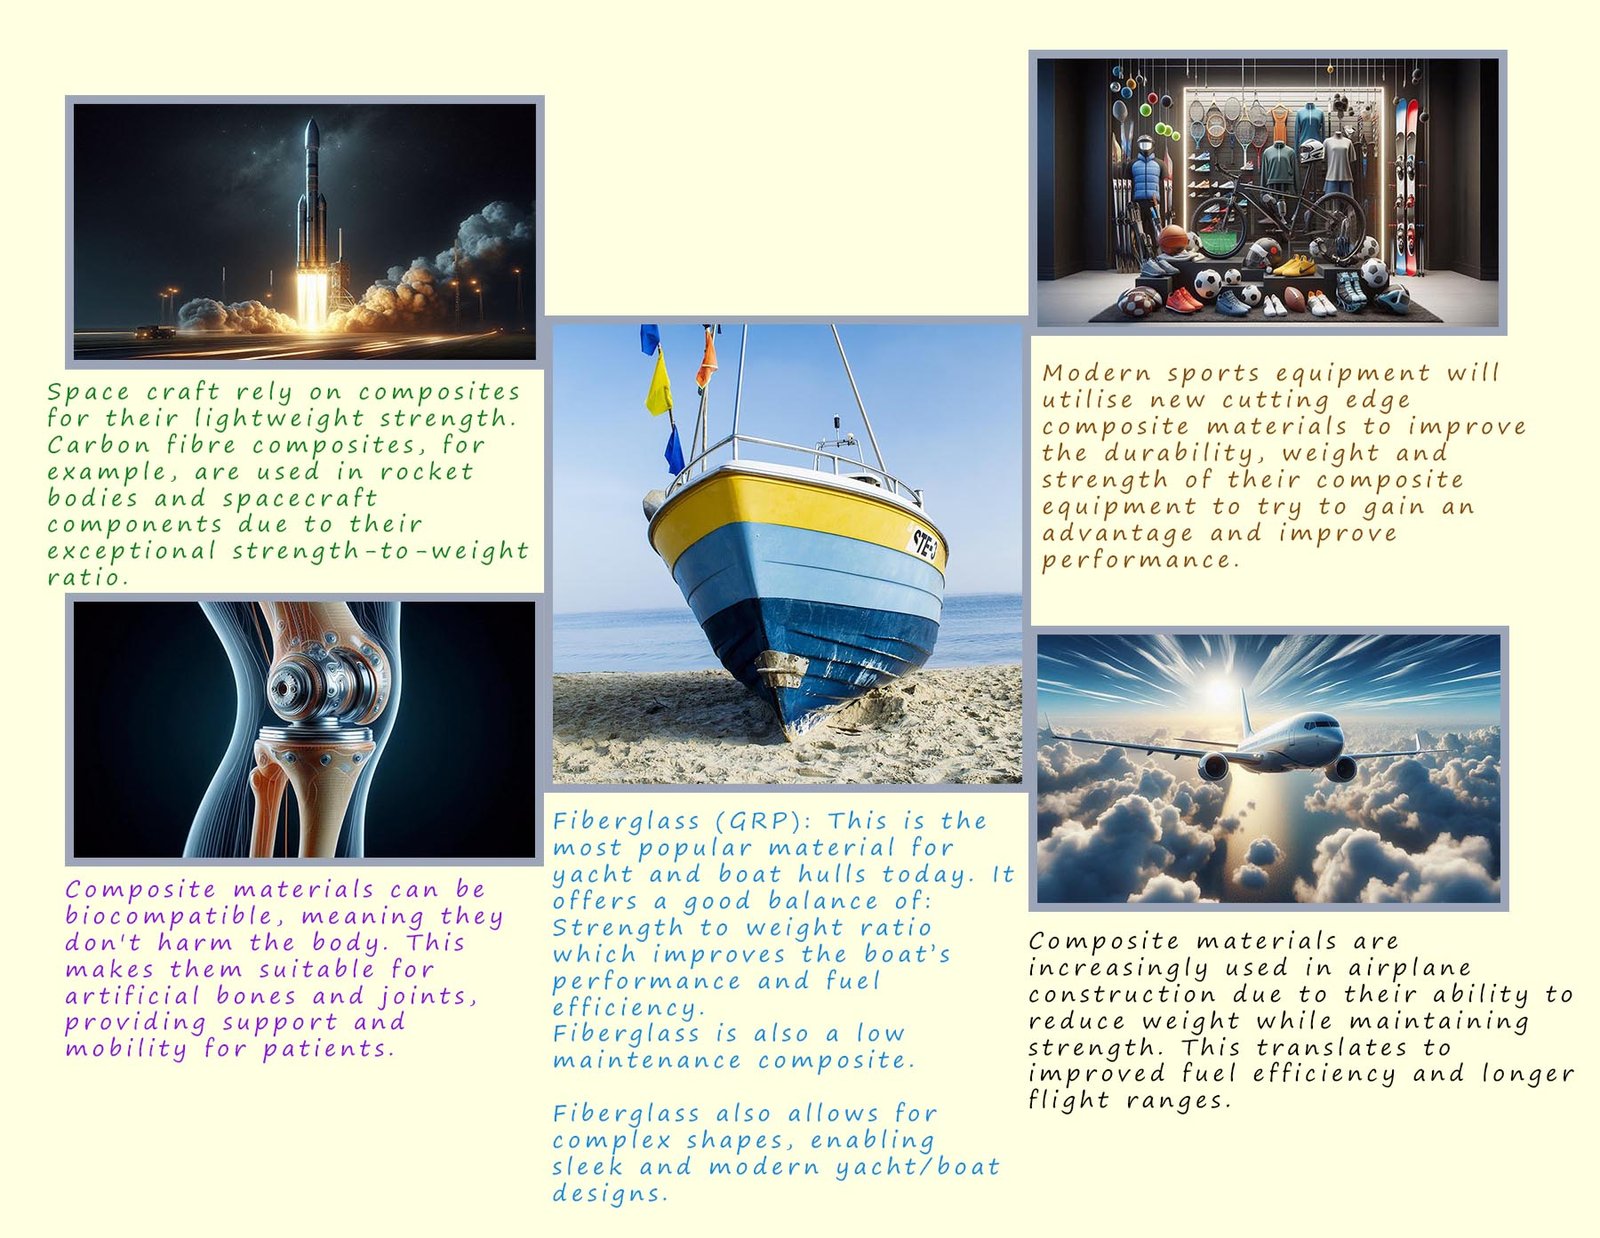 Montage image showing the uses of common composite materials and why they are used